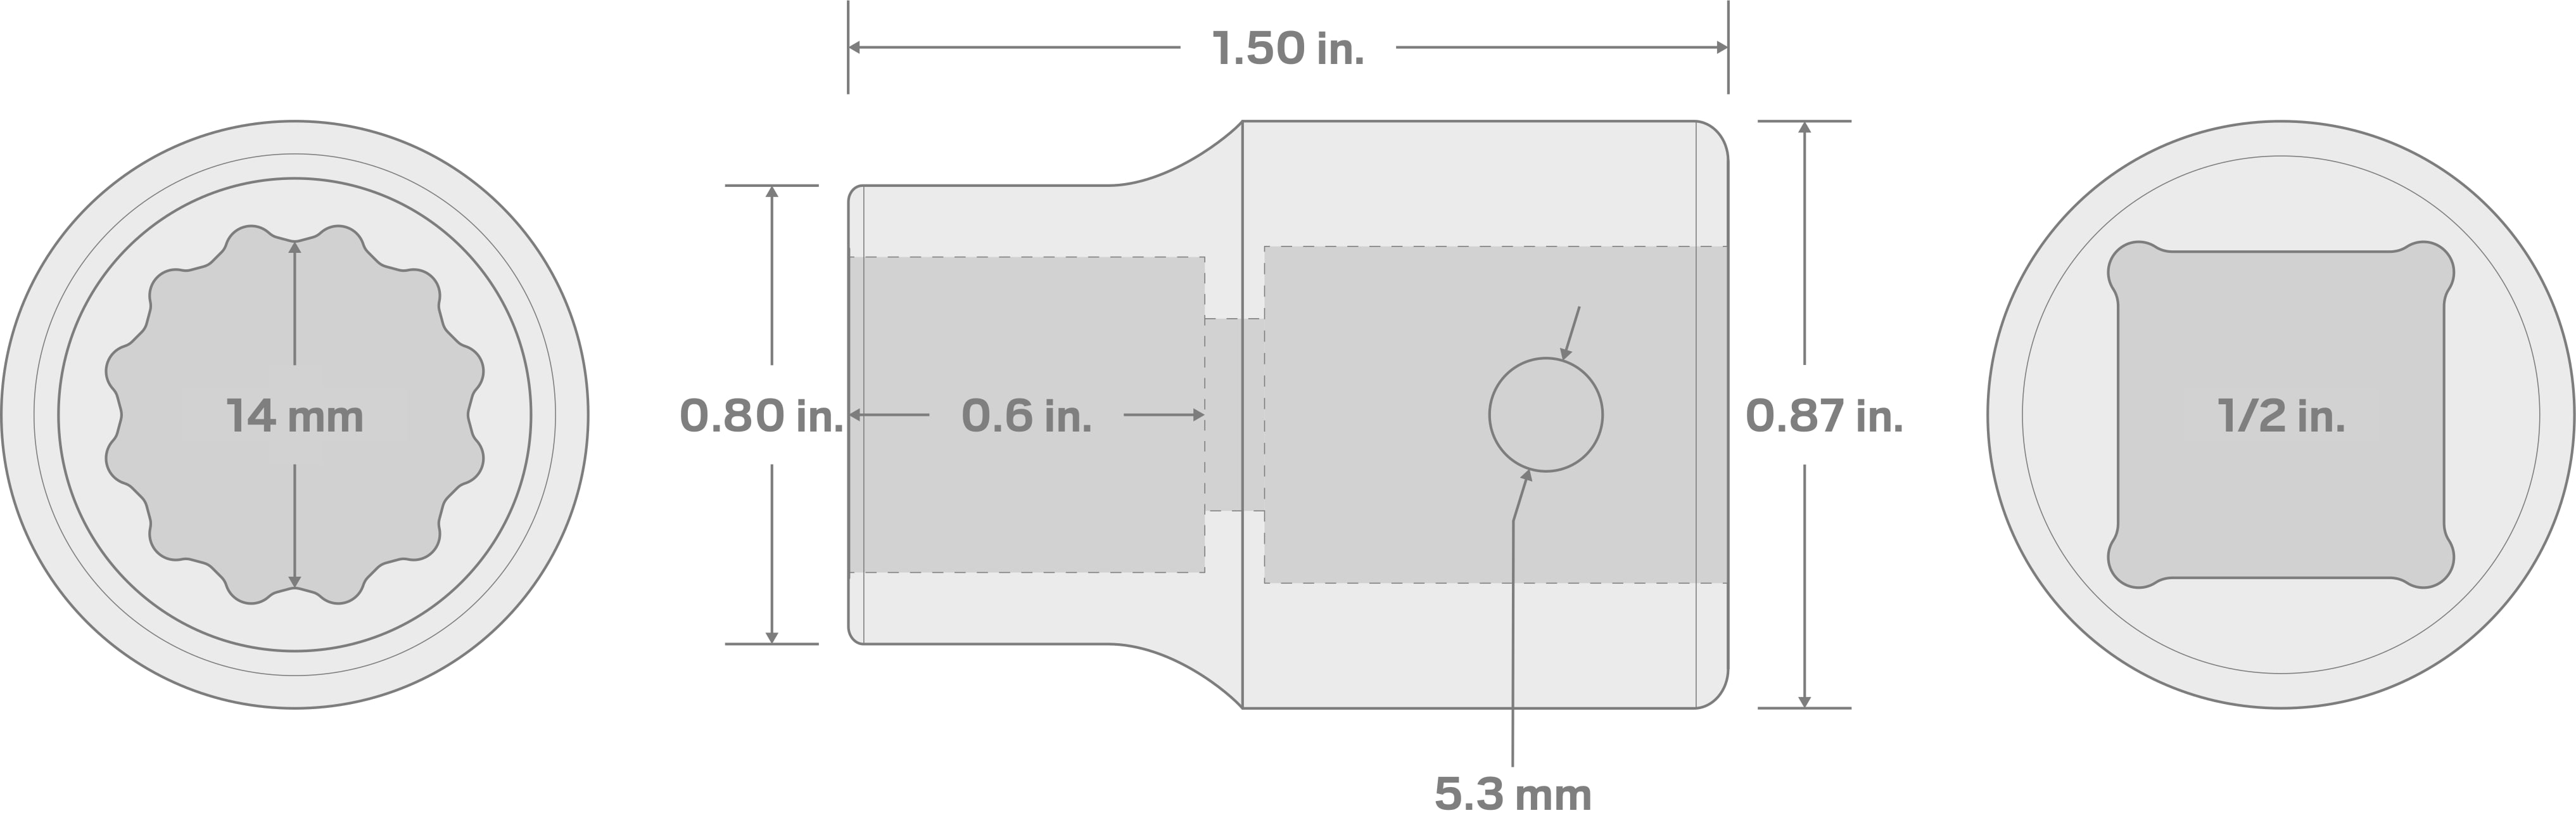 Specs for 1/2 Inch Drive x 14 mm 12-Point Impact Socket